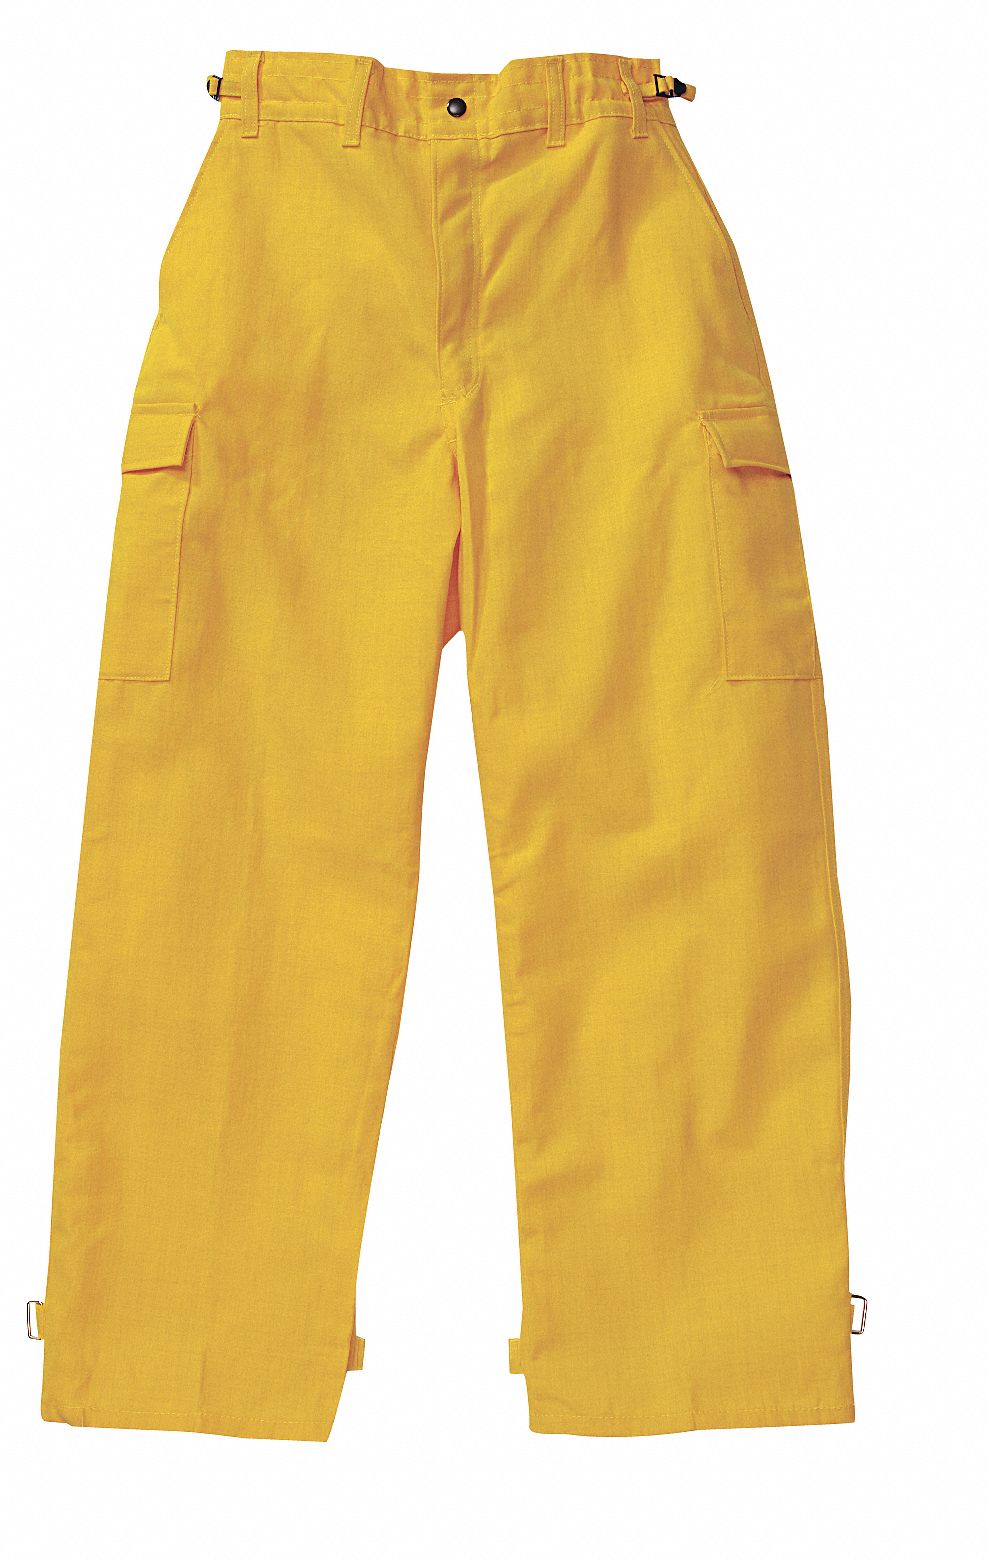 Wildland Fire Over Pants: 2XL, 43 to 47 in Fits Waist Size, 28 in Inseam, Yellow